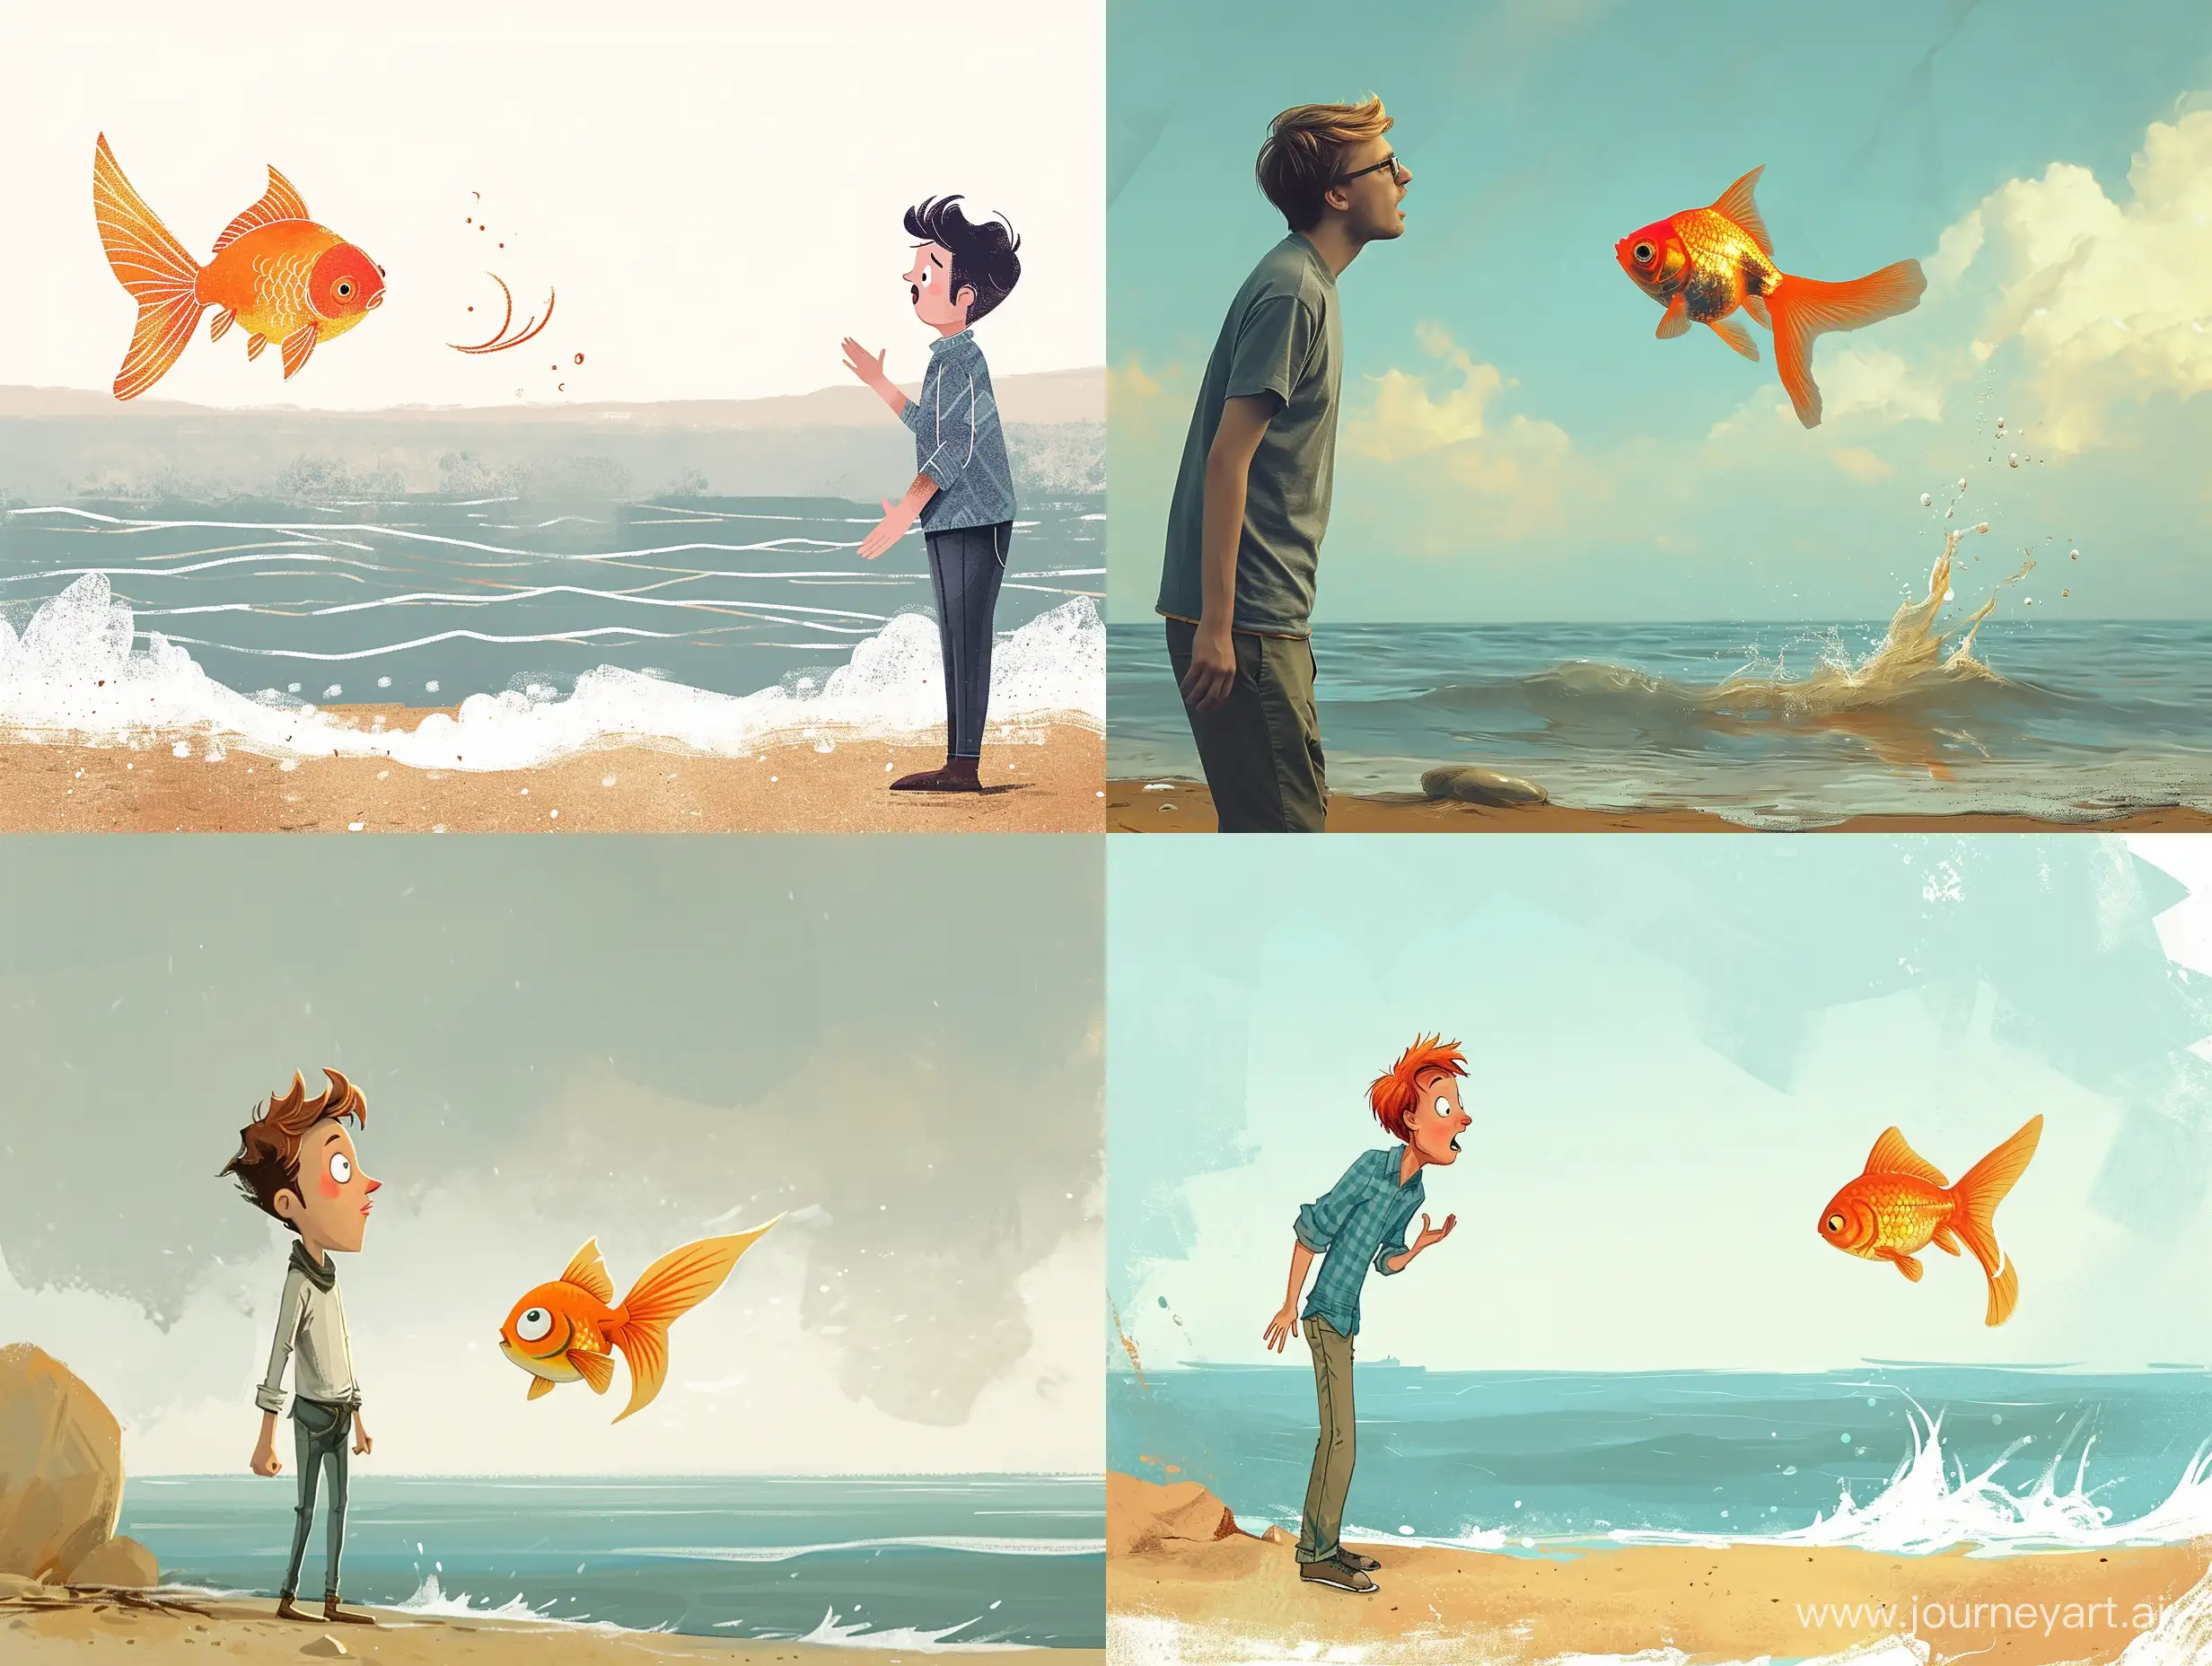 A surprised and indignant tall young IT-guy standing on the shore looks at a small digital goldfish that swims away from him into the sea, waving its tail.